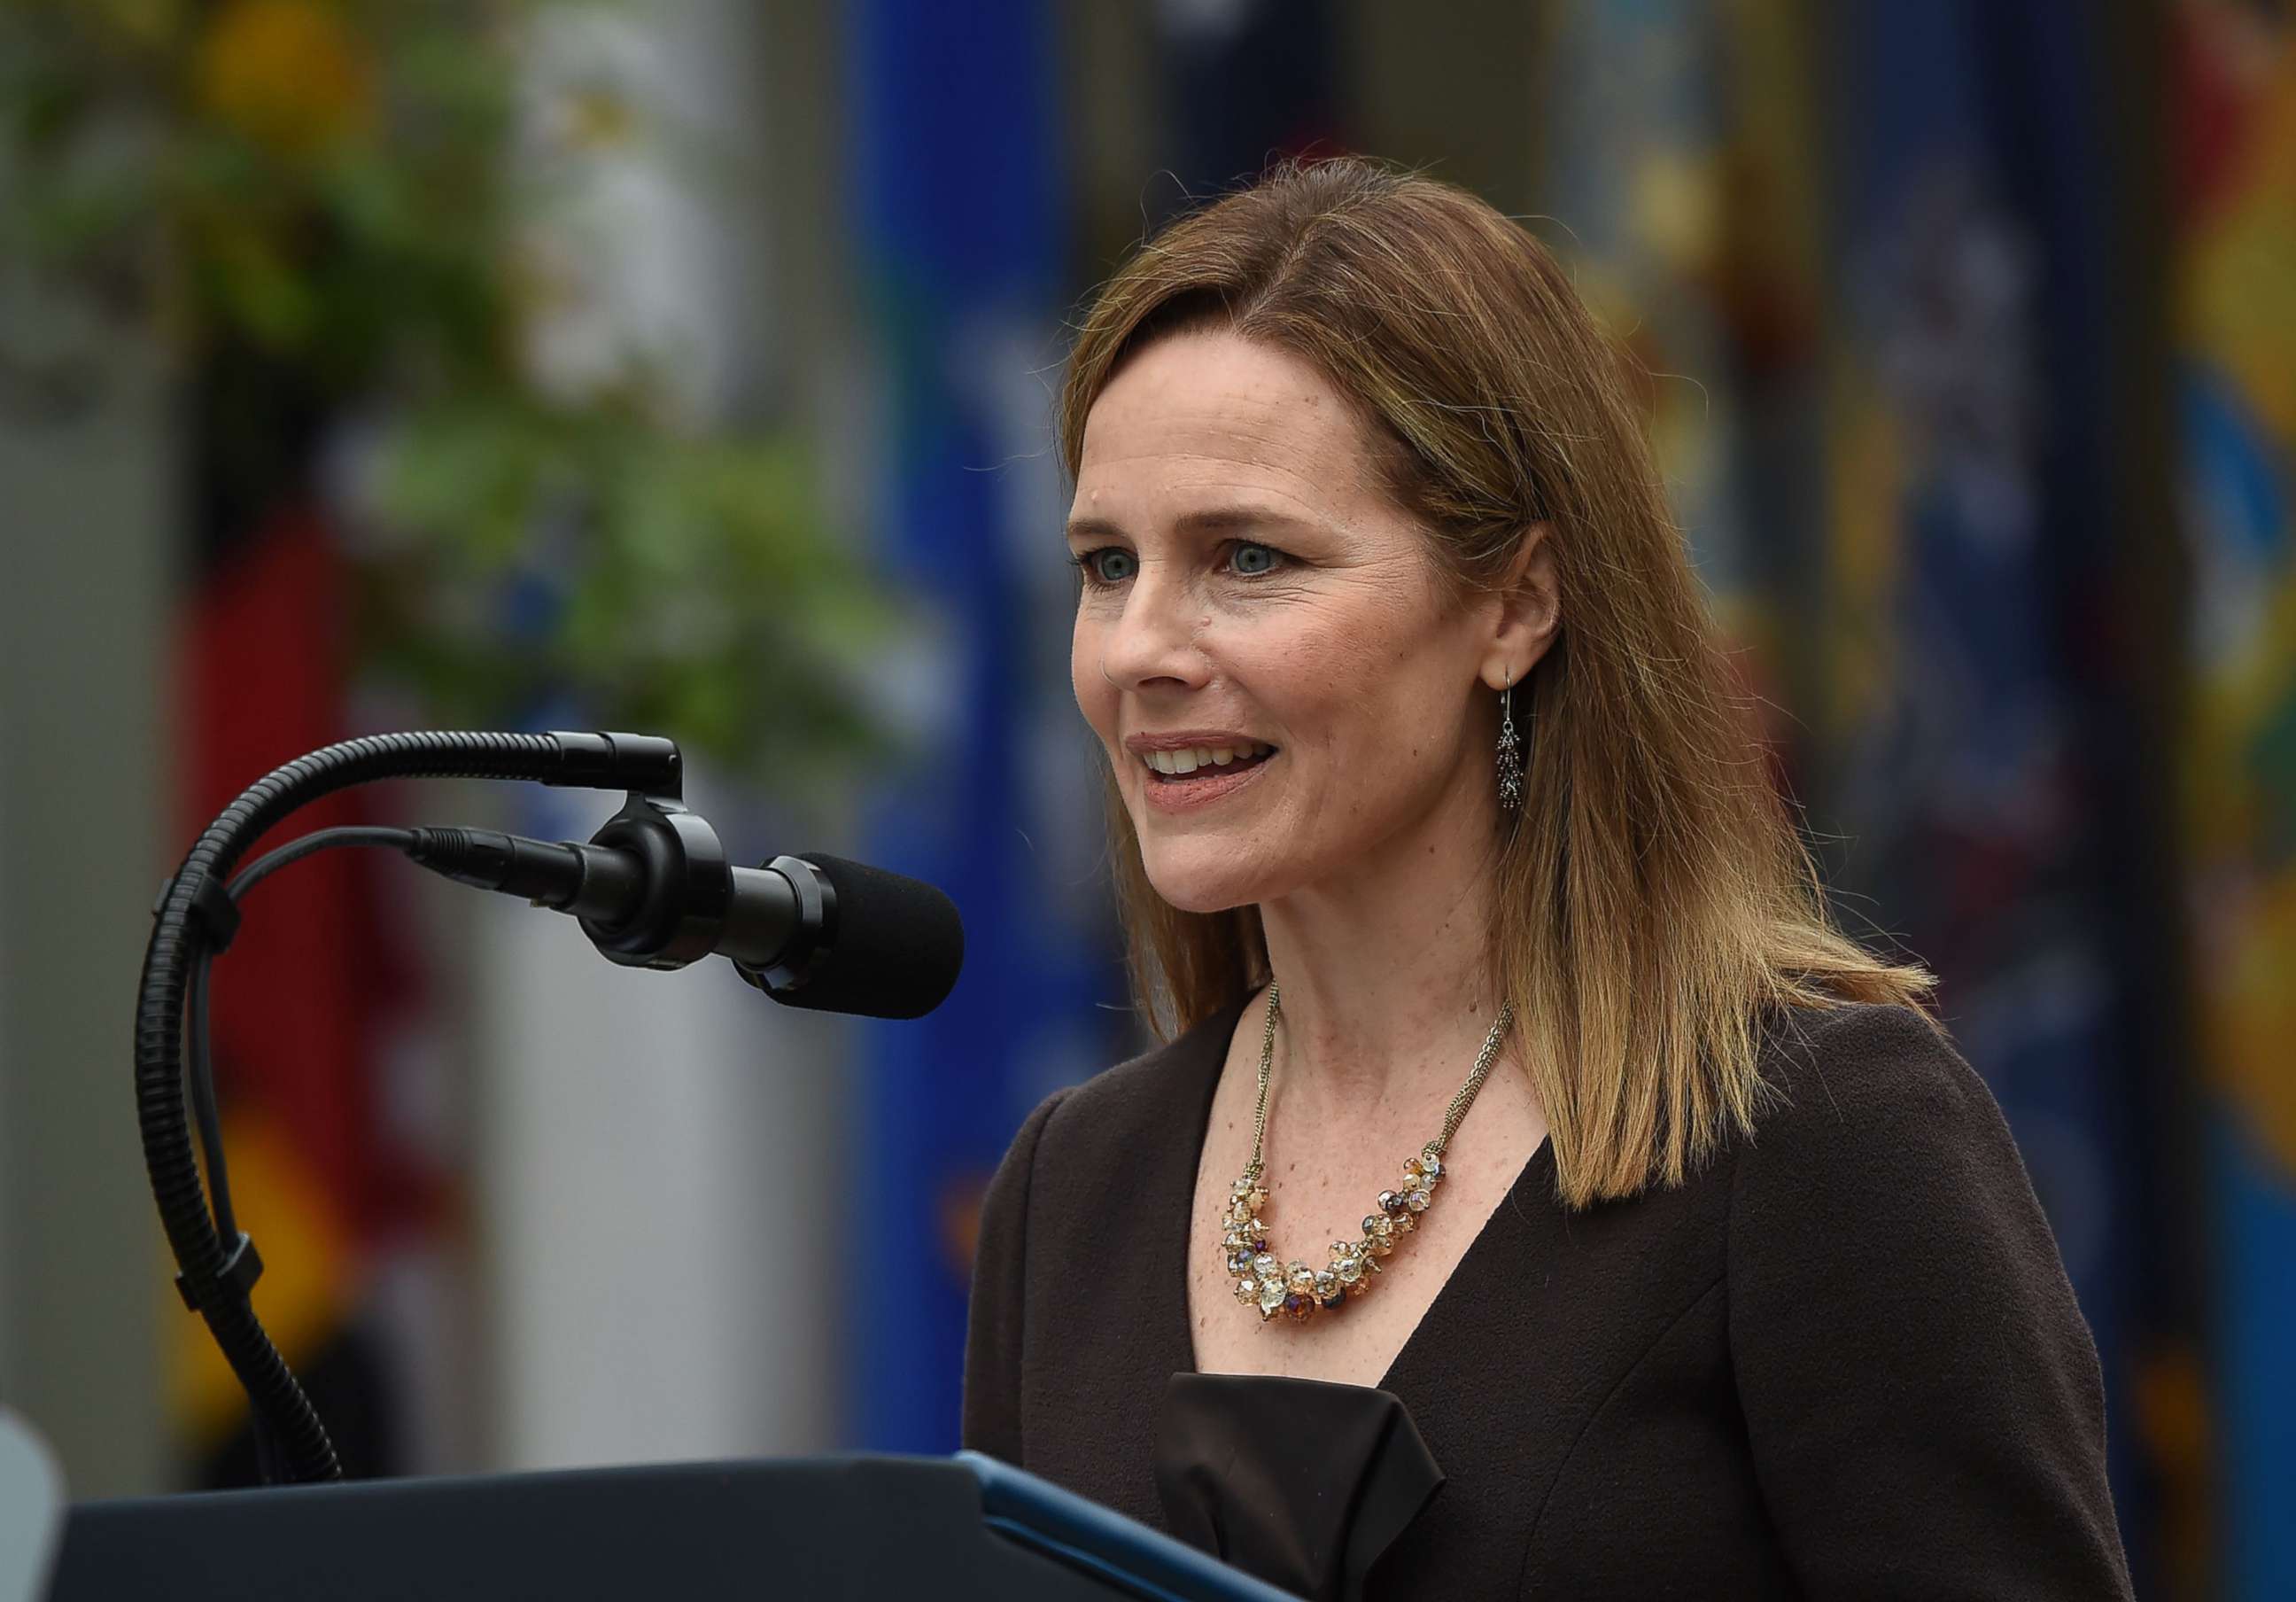 PHOTO: Judge Amy Coney Barrett speaks after being nominated to the US Supreme Court by President Donald Trump in the Rose Garden of the White House in Washington, DC, on Sept. 26, 2020.